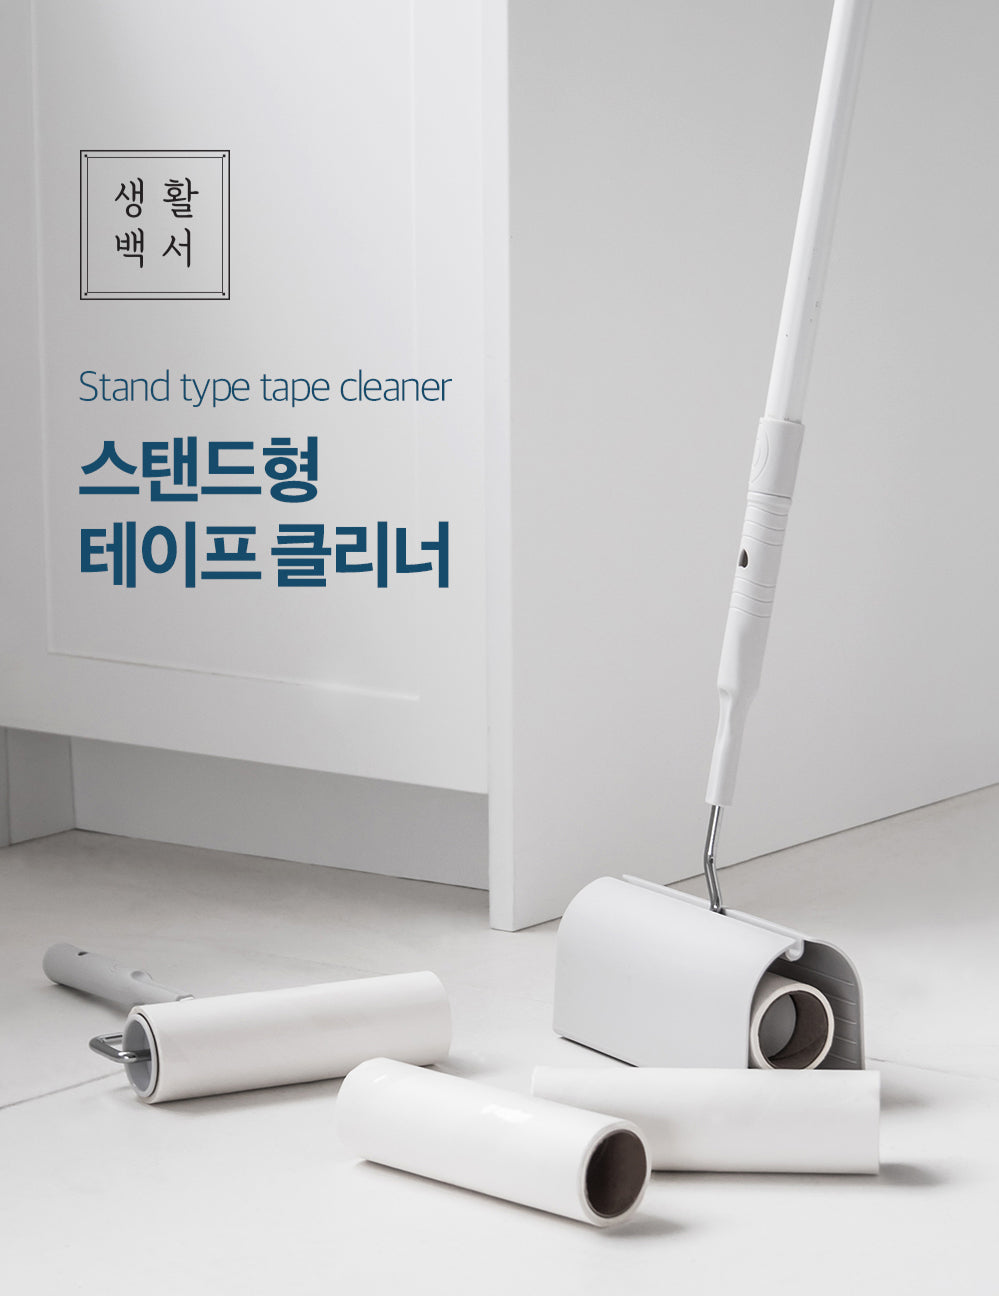 stand-type-tape-cleaner-1